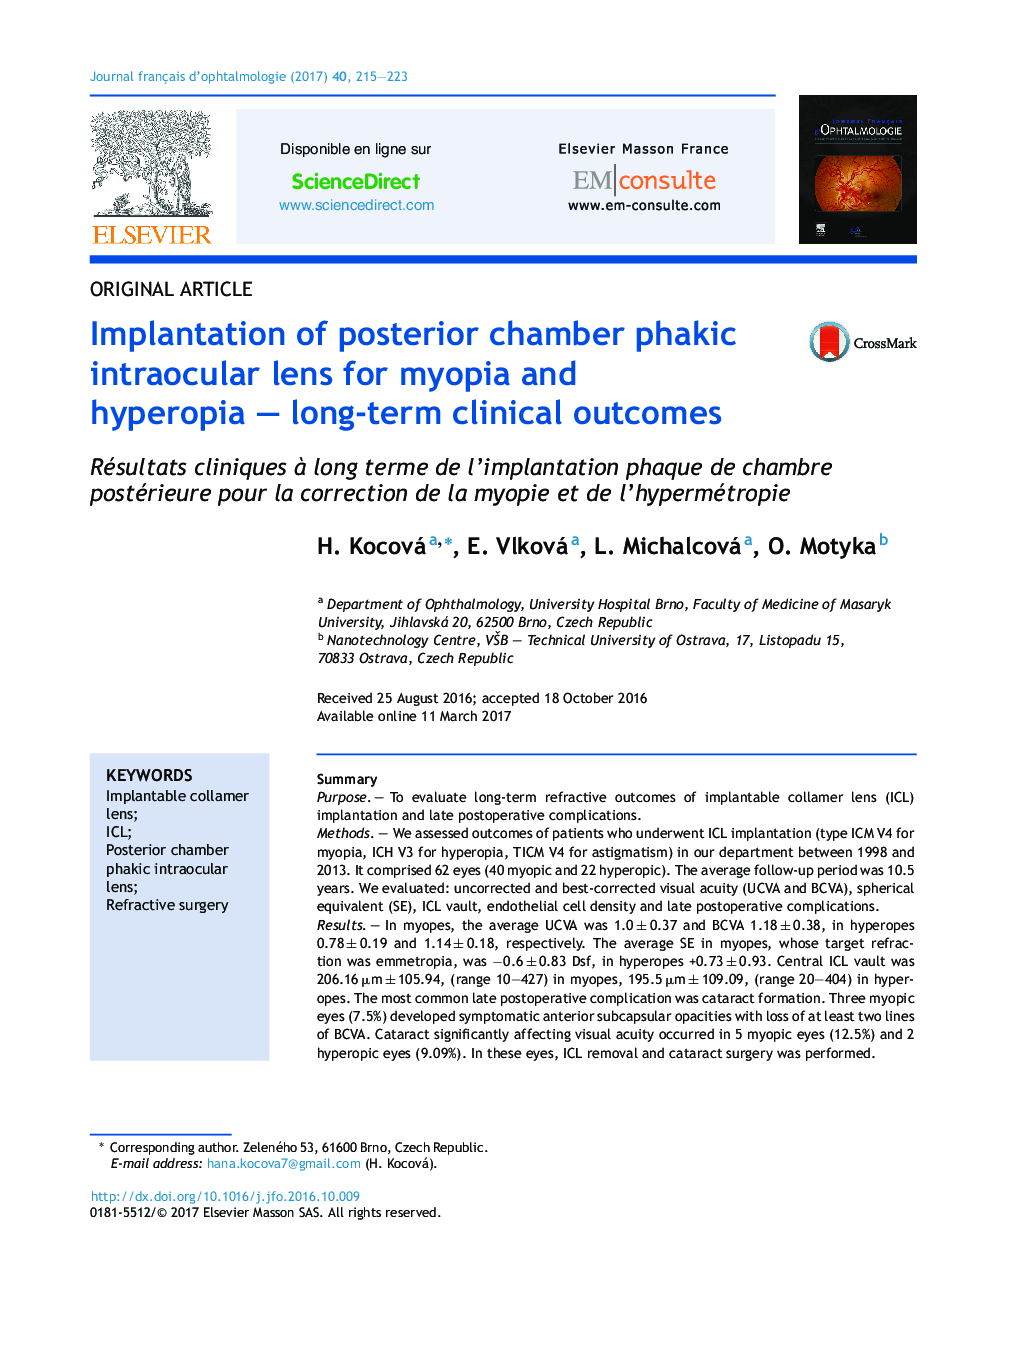 Implantation of posterior chamber phakic intraocular lens for myopia and hyperopiaÂ -Â long-term clinical outcomes